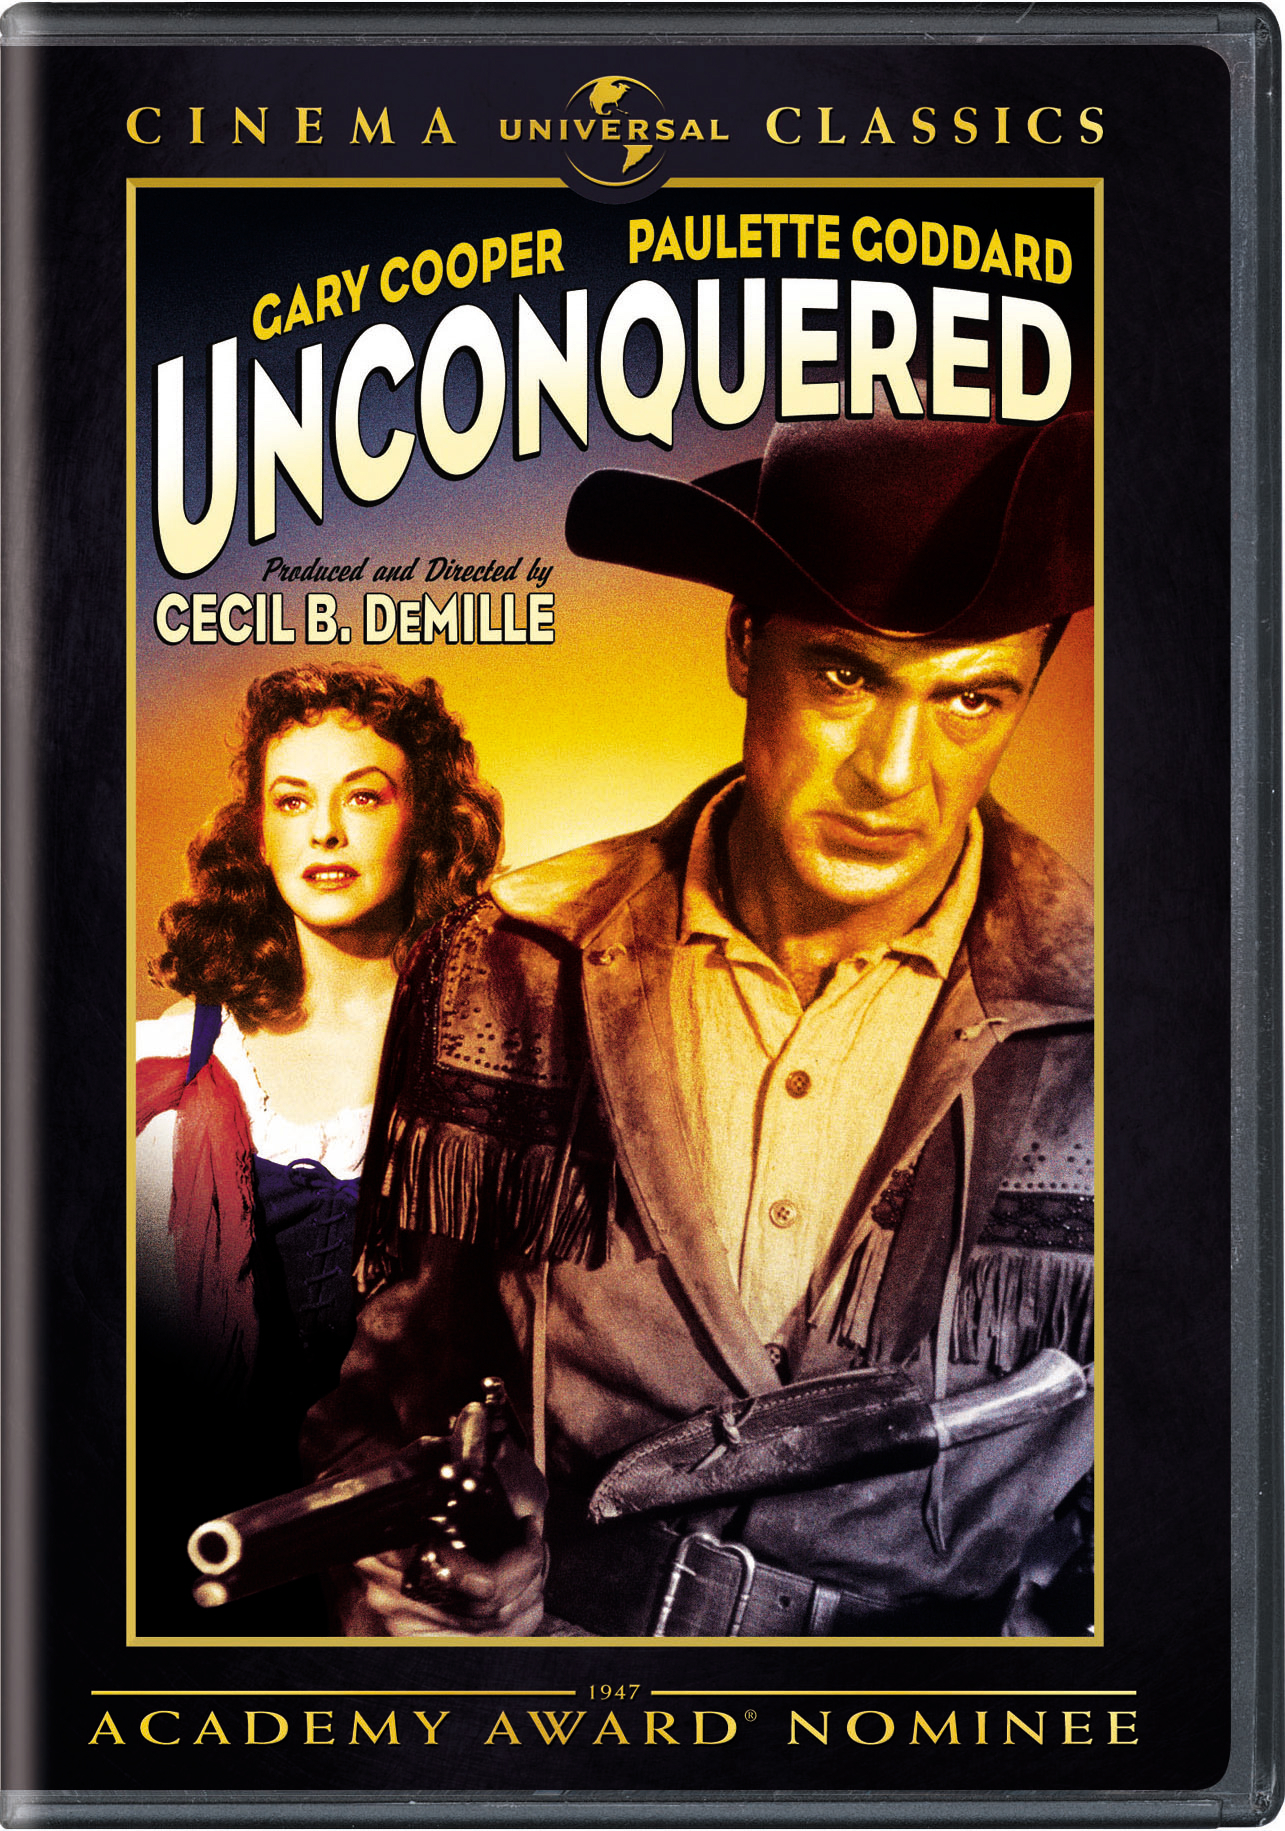 Unconquered - DVD [ 1947 ]  - Classic Movies On DVD - Movies On GRUV